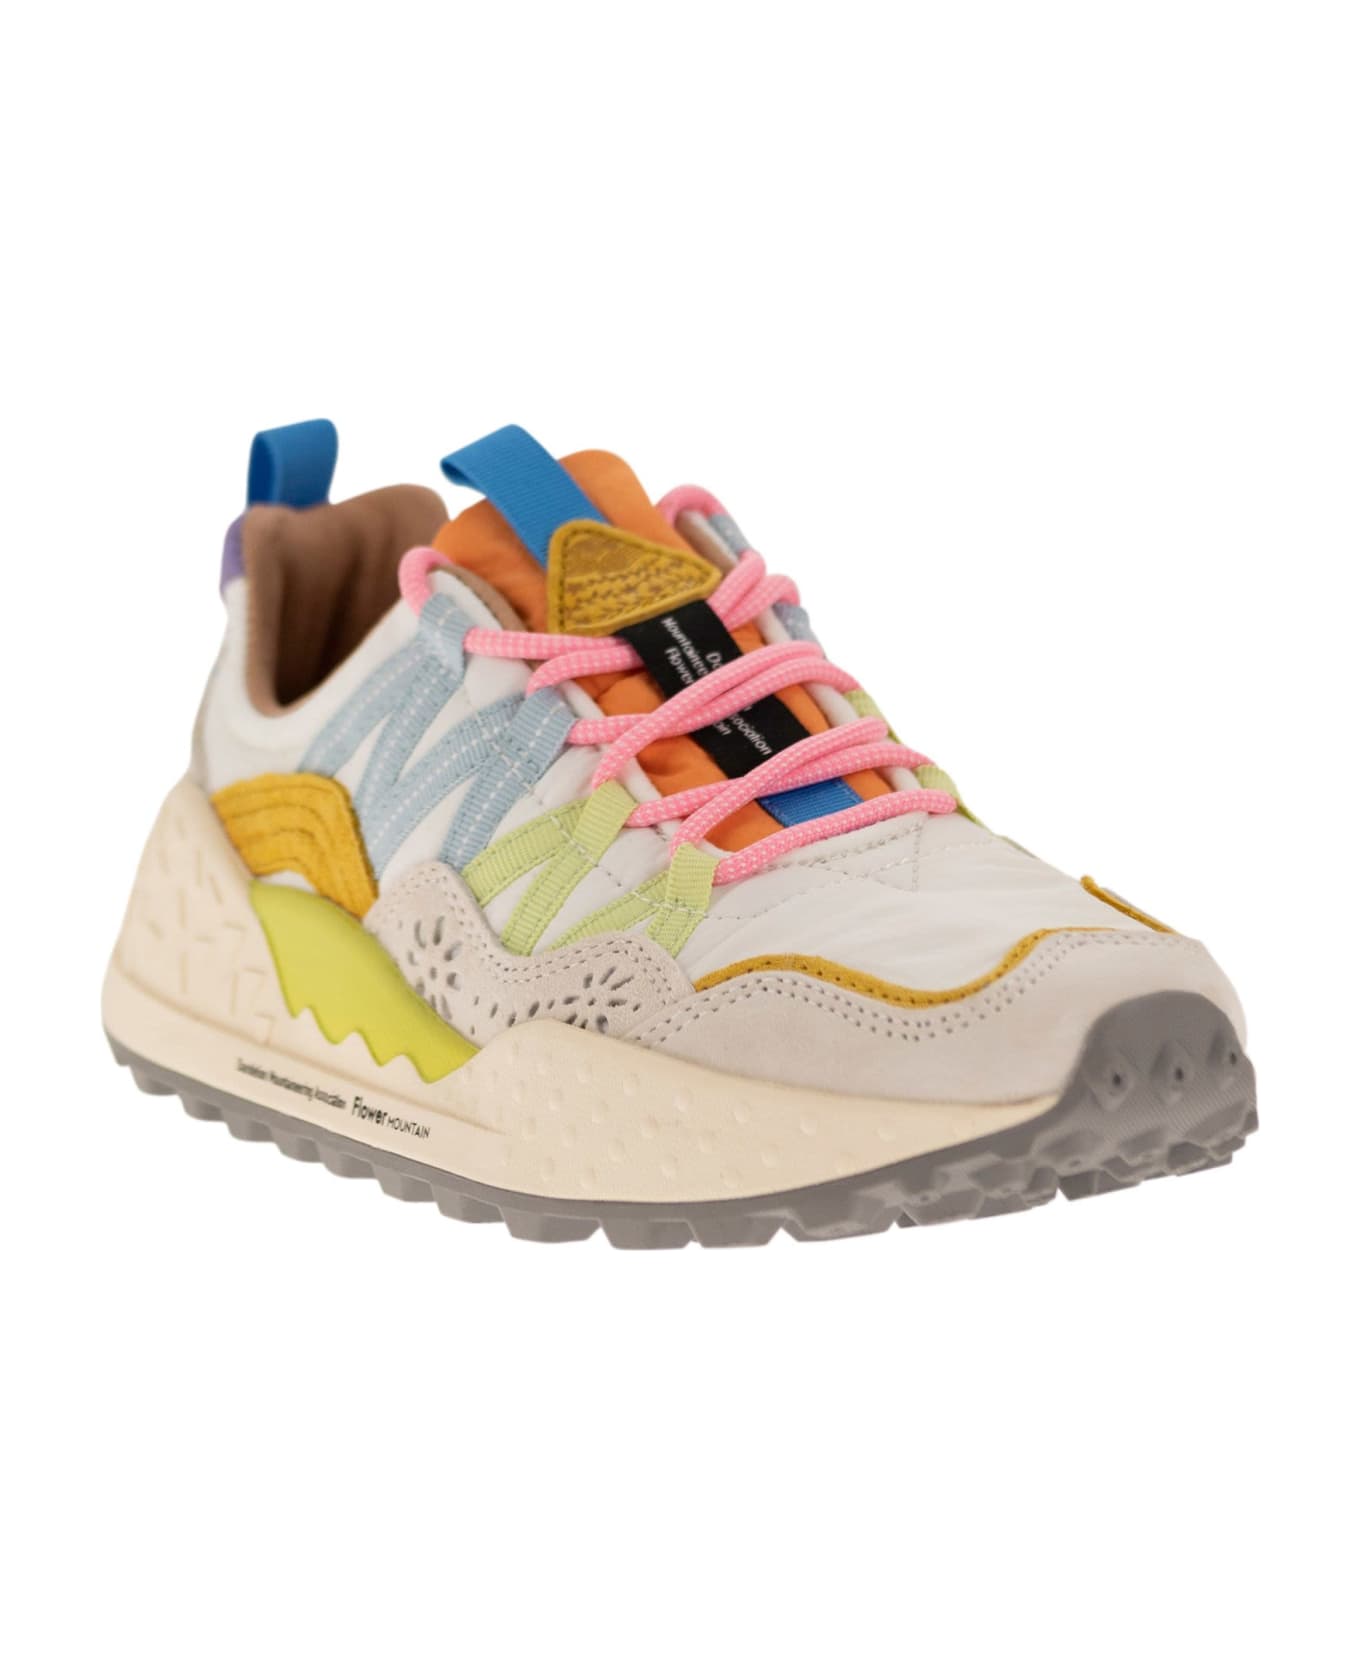 Flower Mountain Washi - Sneakers In Suede And Technical Fabric - Beige